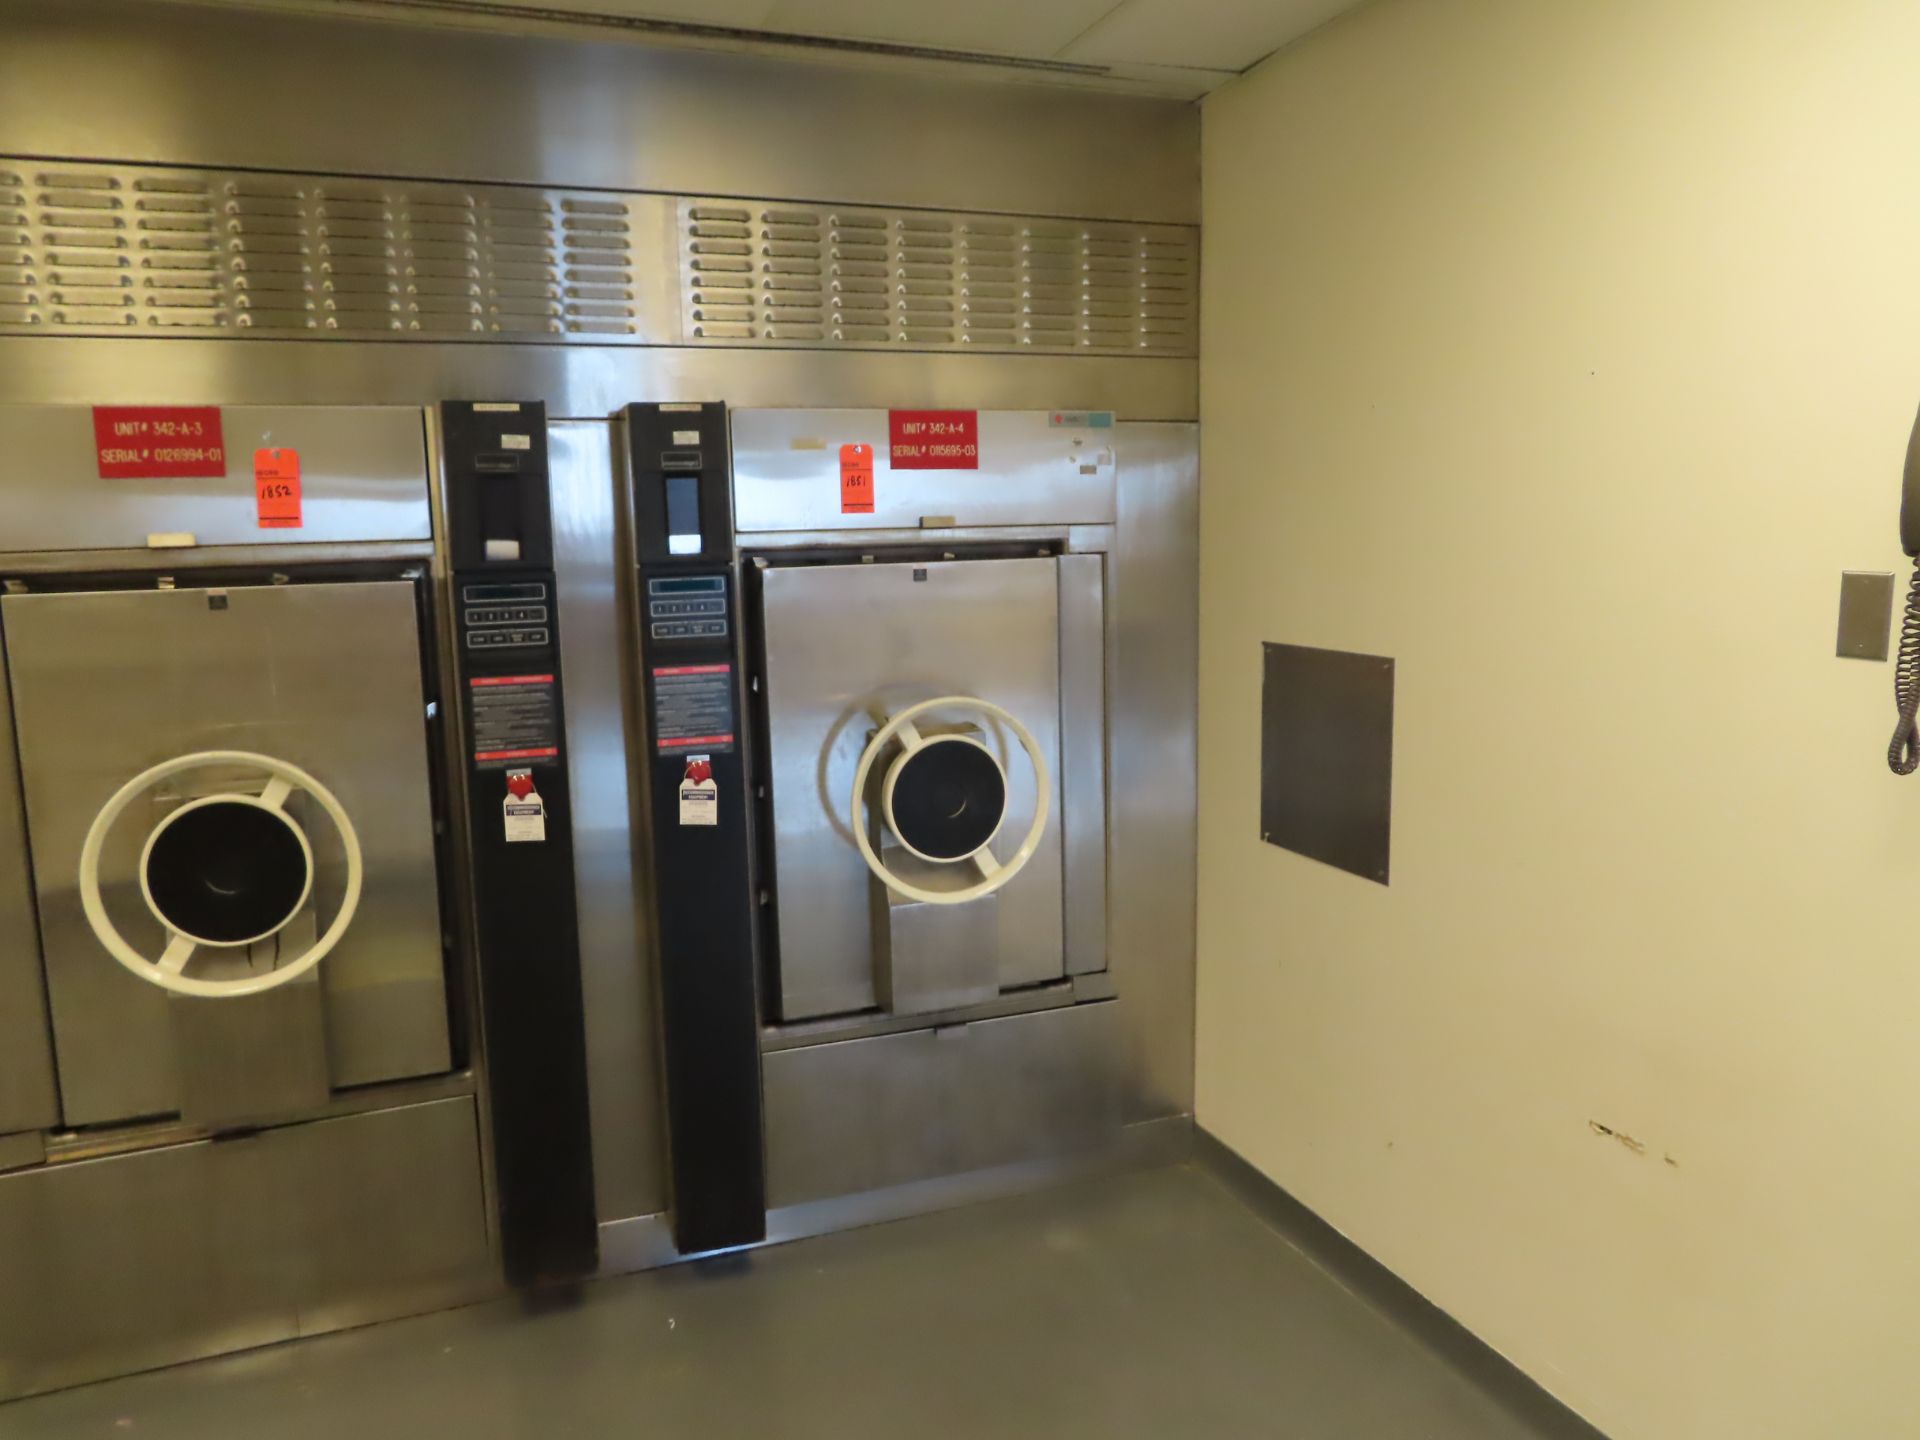 Amsco 3031-S autoclave, s/n 0115695-03, location B wing, 3rd floor, room 342C